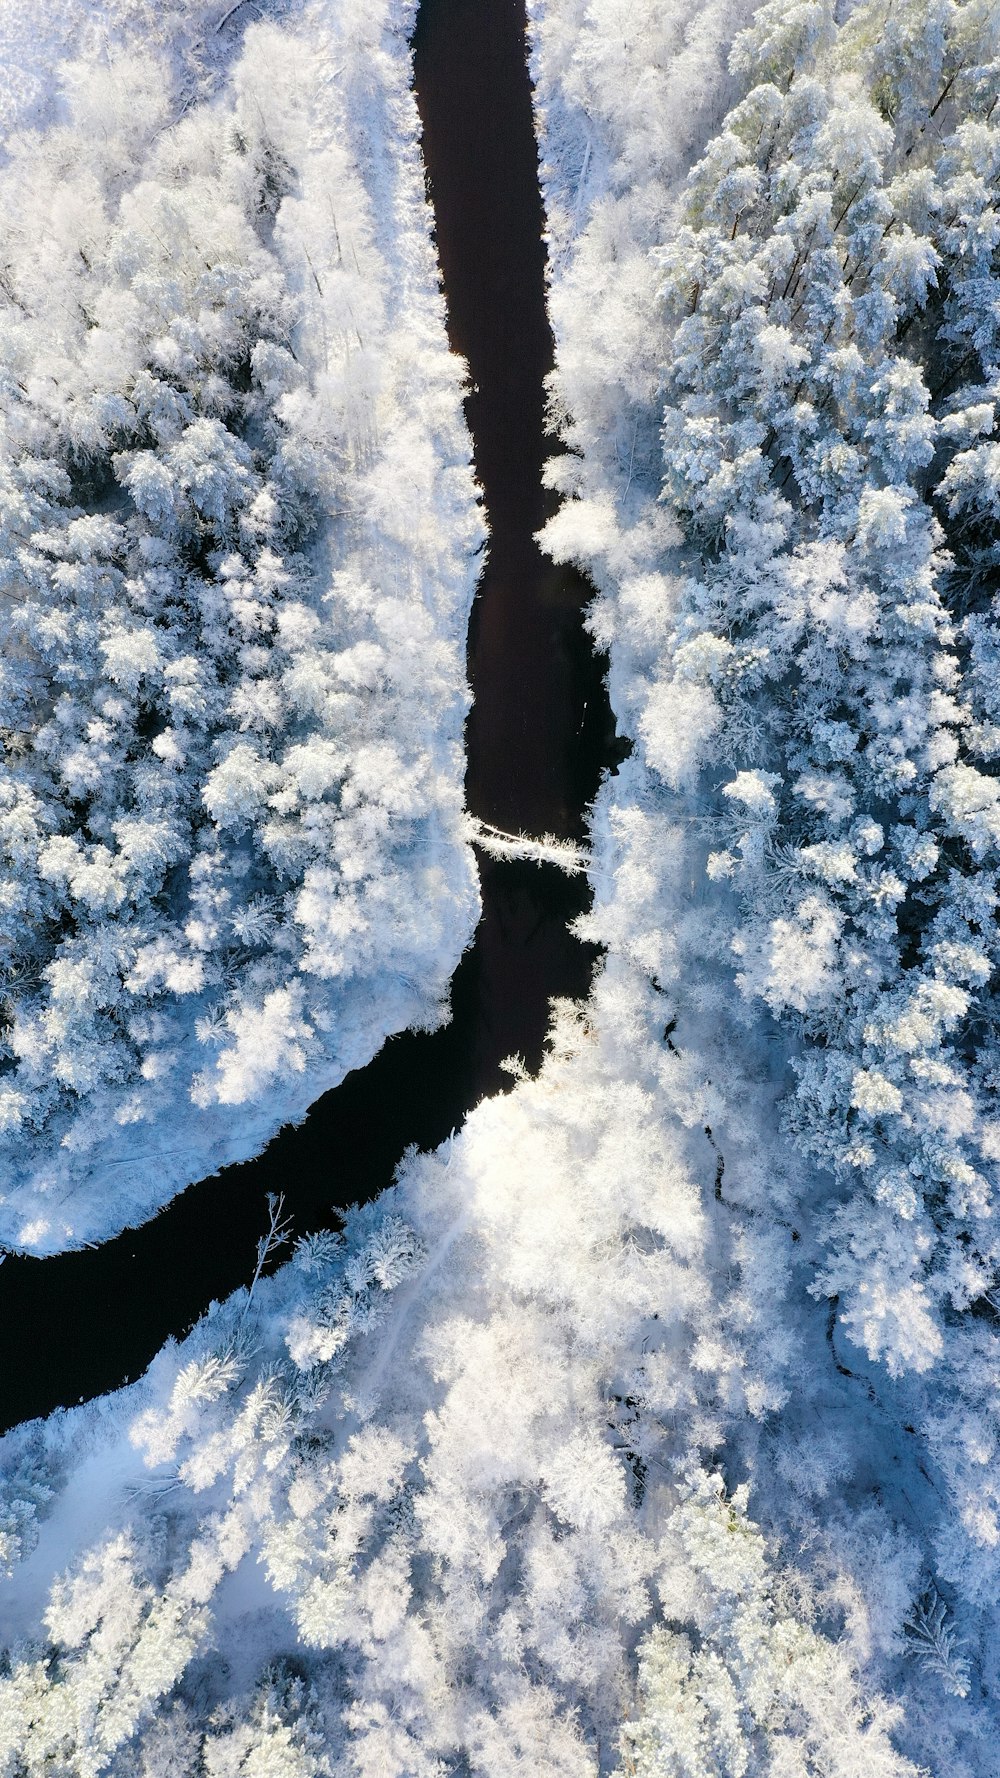 river near snow forest